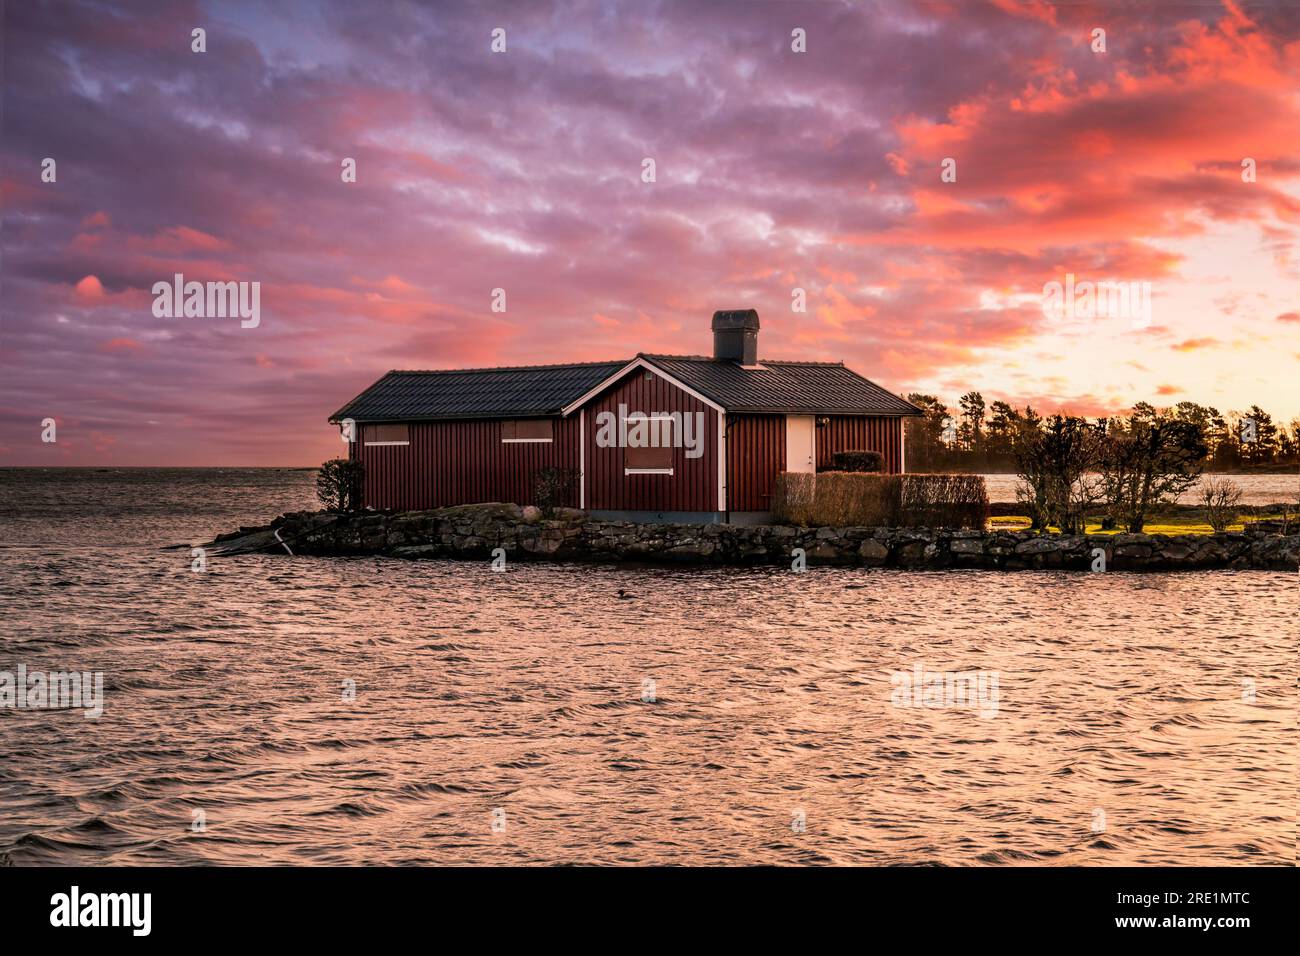 Sweden lake or Sweden sea, sunrise clouds and long exposure of a landscape shot in Scandinavia Sweden house Stock Photo